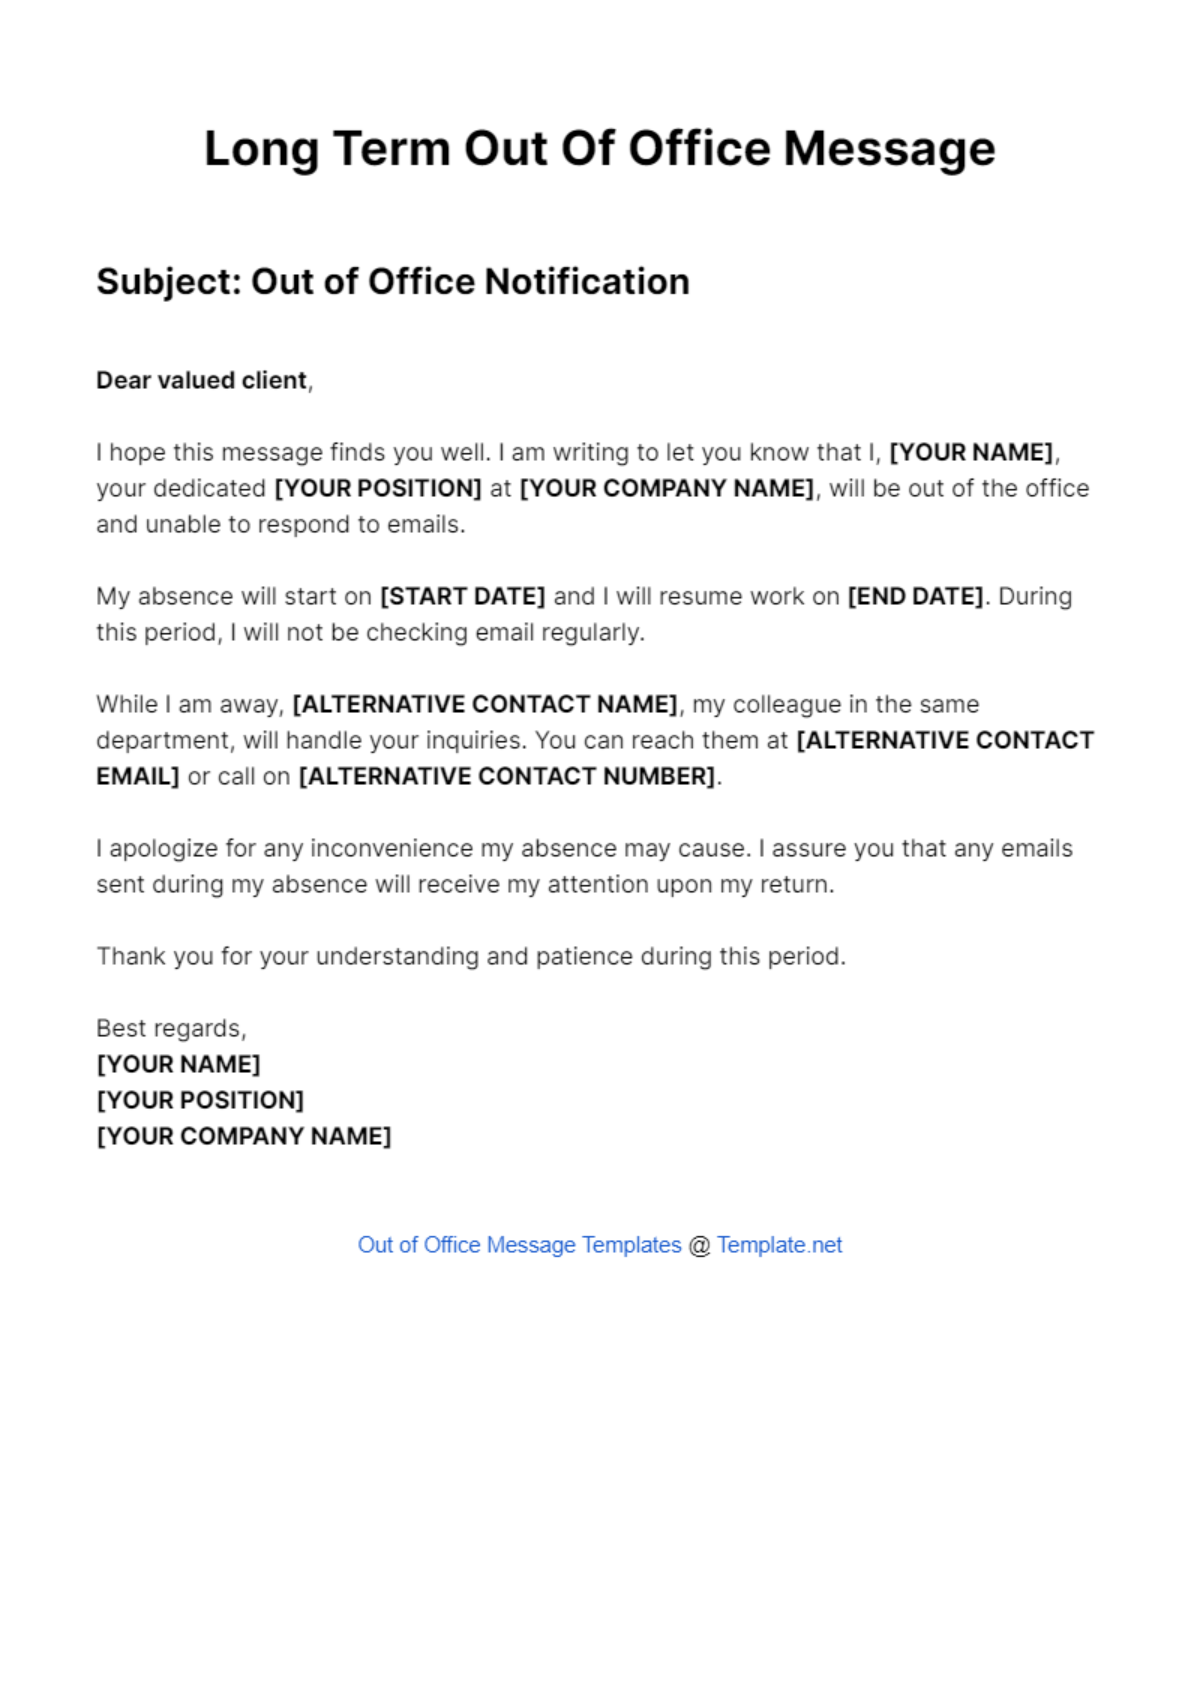 Long Term Out Of Office Message Template